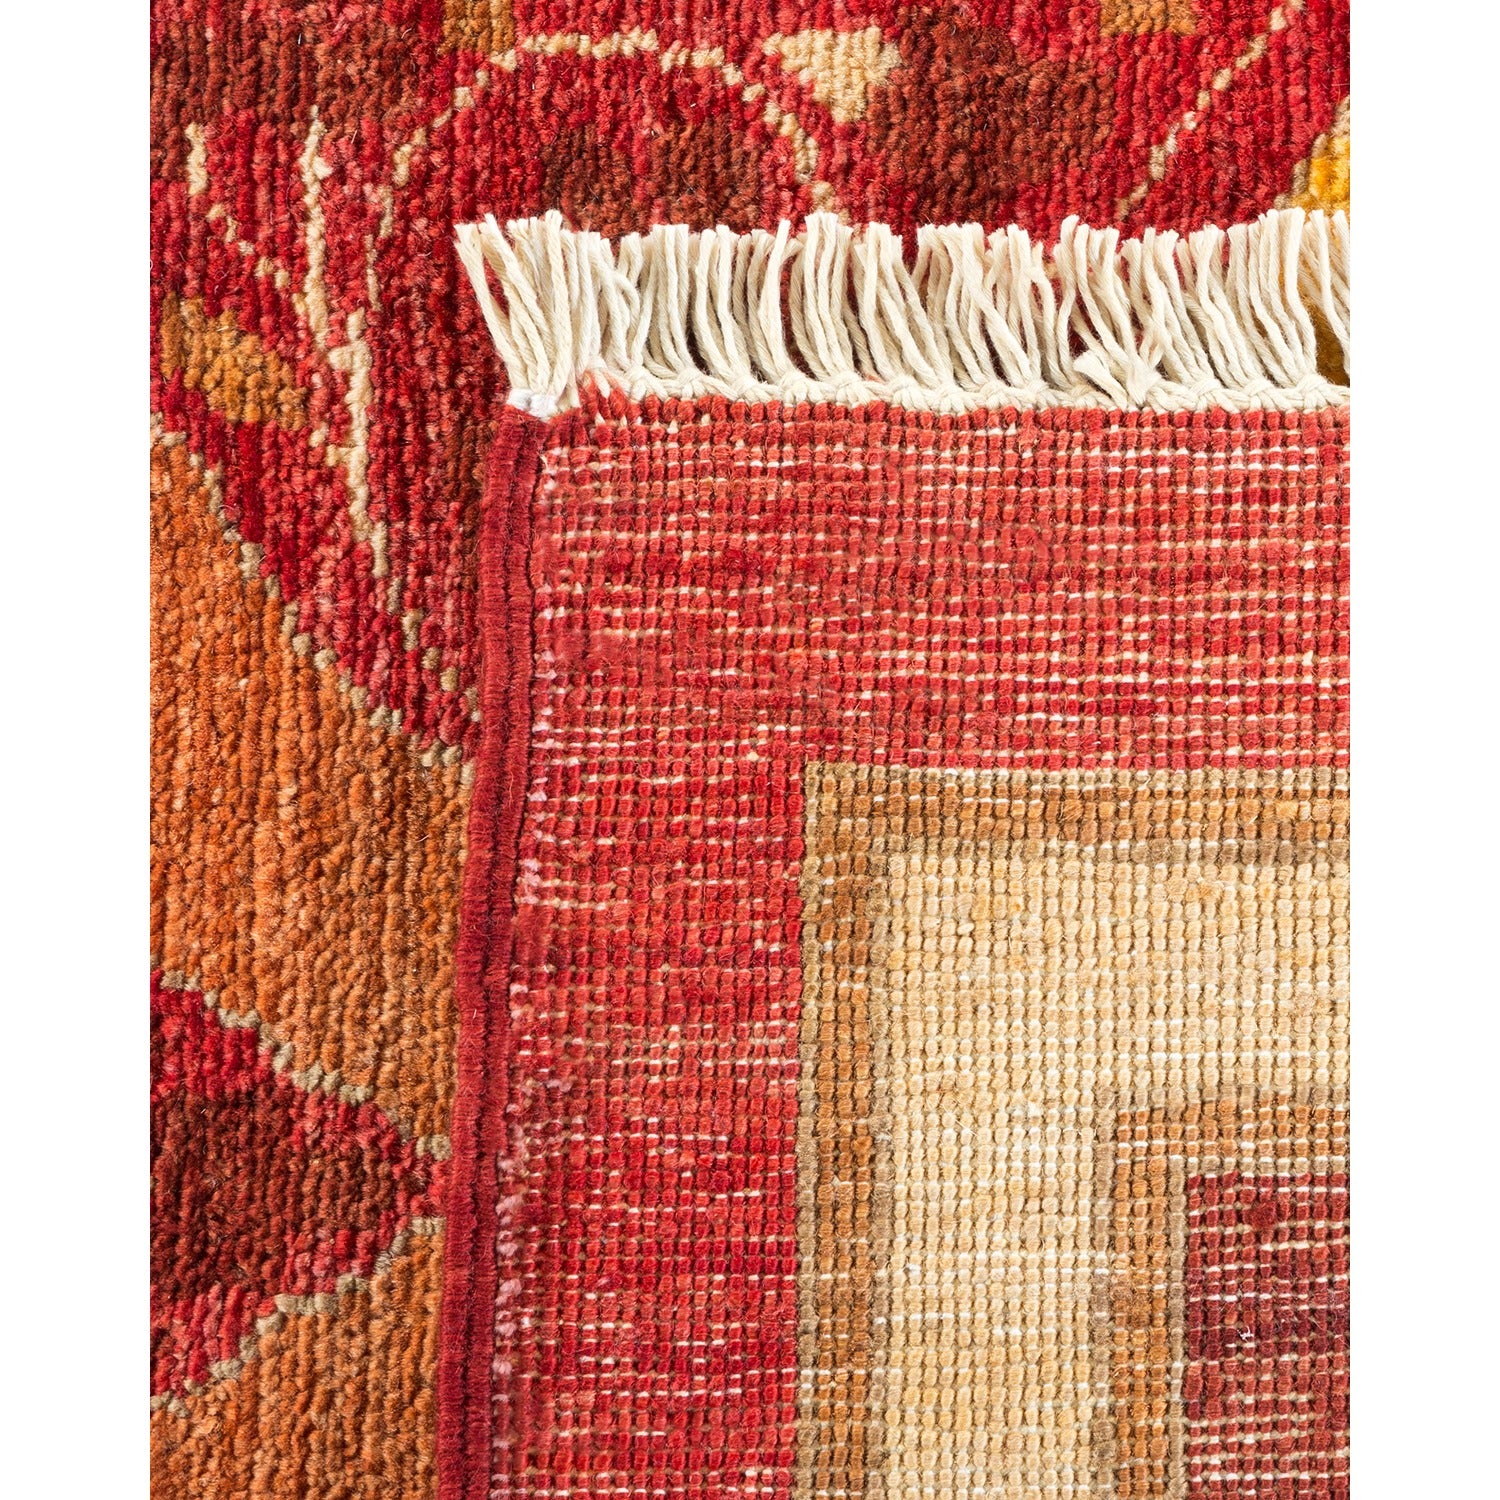 Intricately woven rug with neat fringe and vibrant geometric pattern.